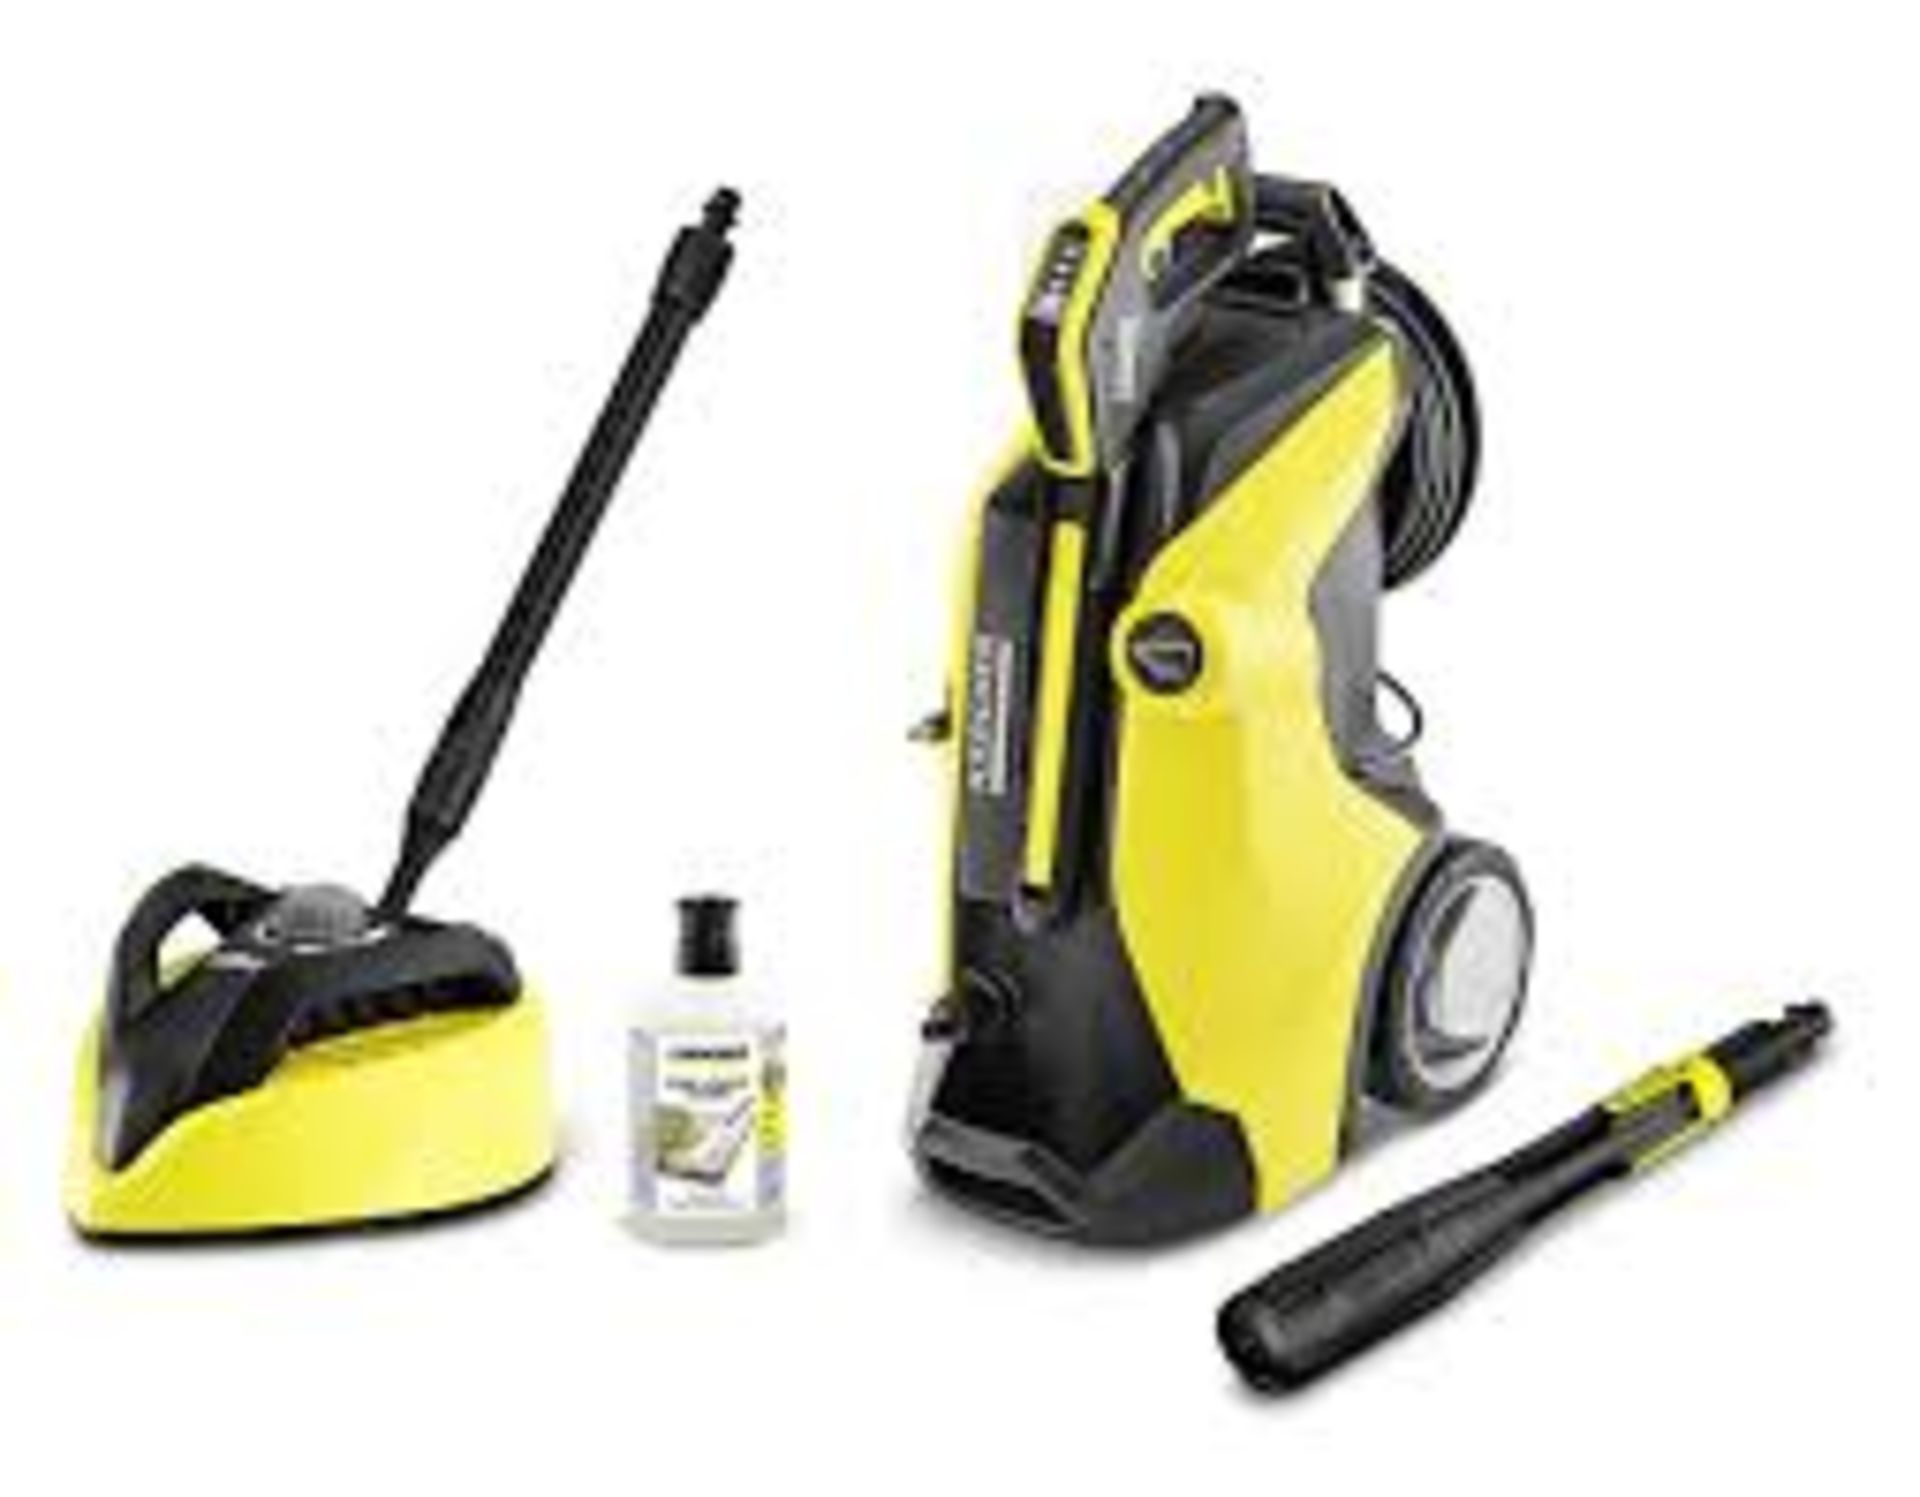 Kärcher K7 Premium Full Control Plus Home Pressure Washer. - P3. RRP £719.00. If you are looking for